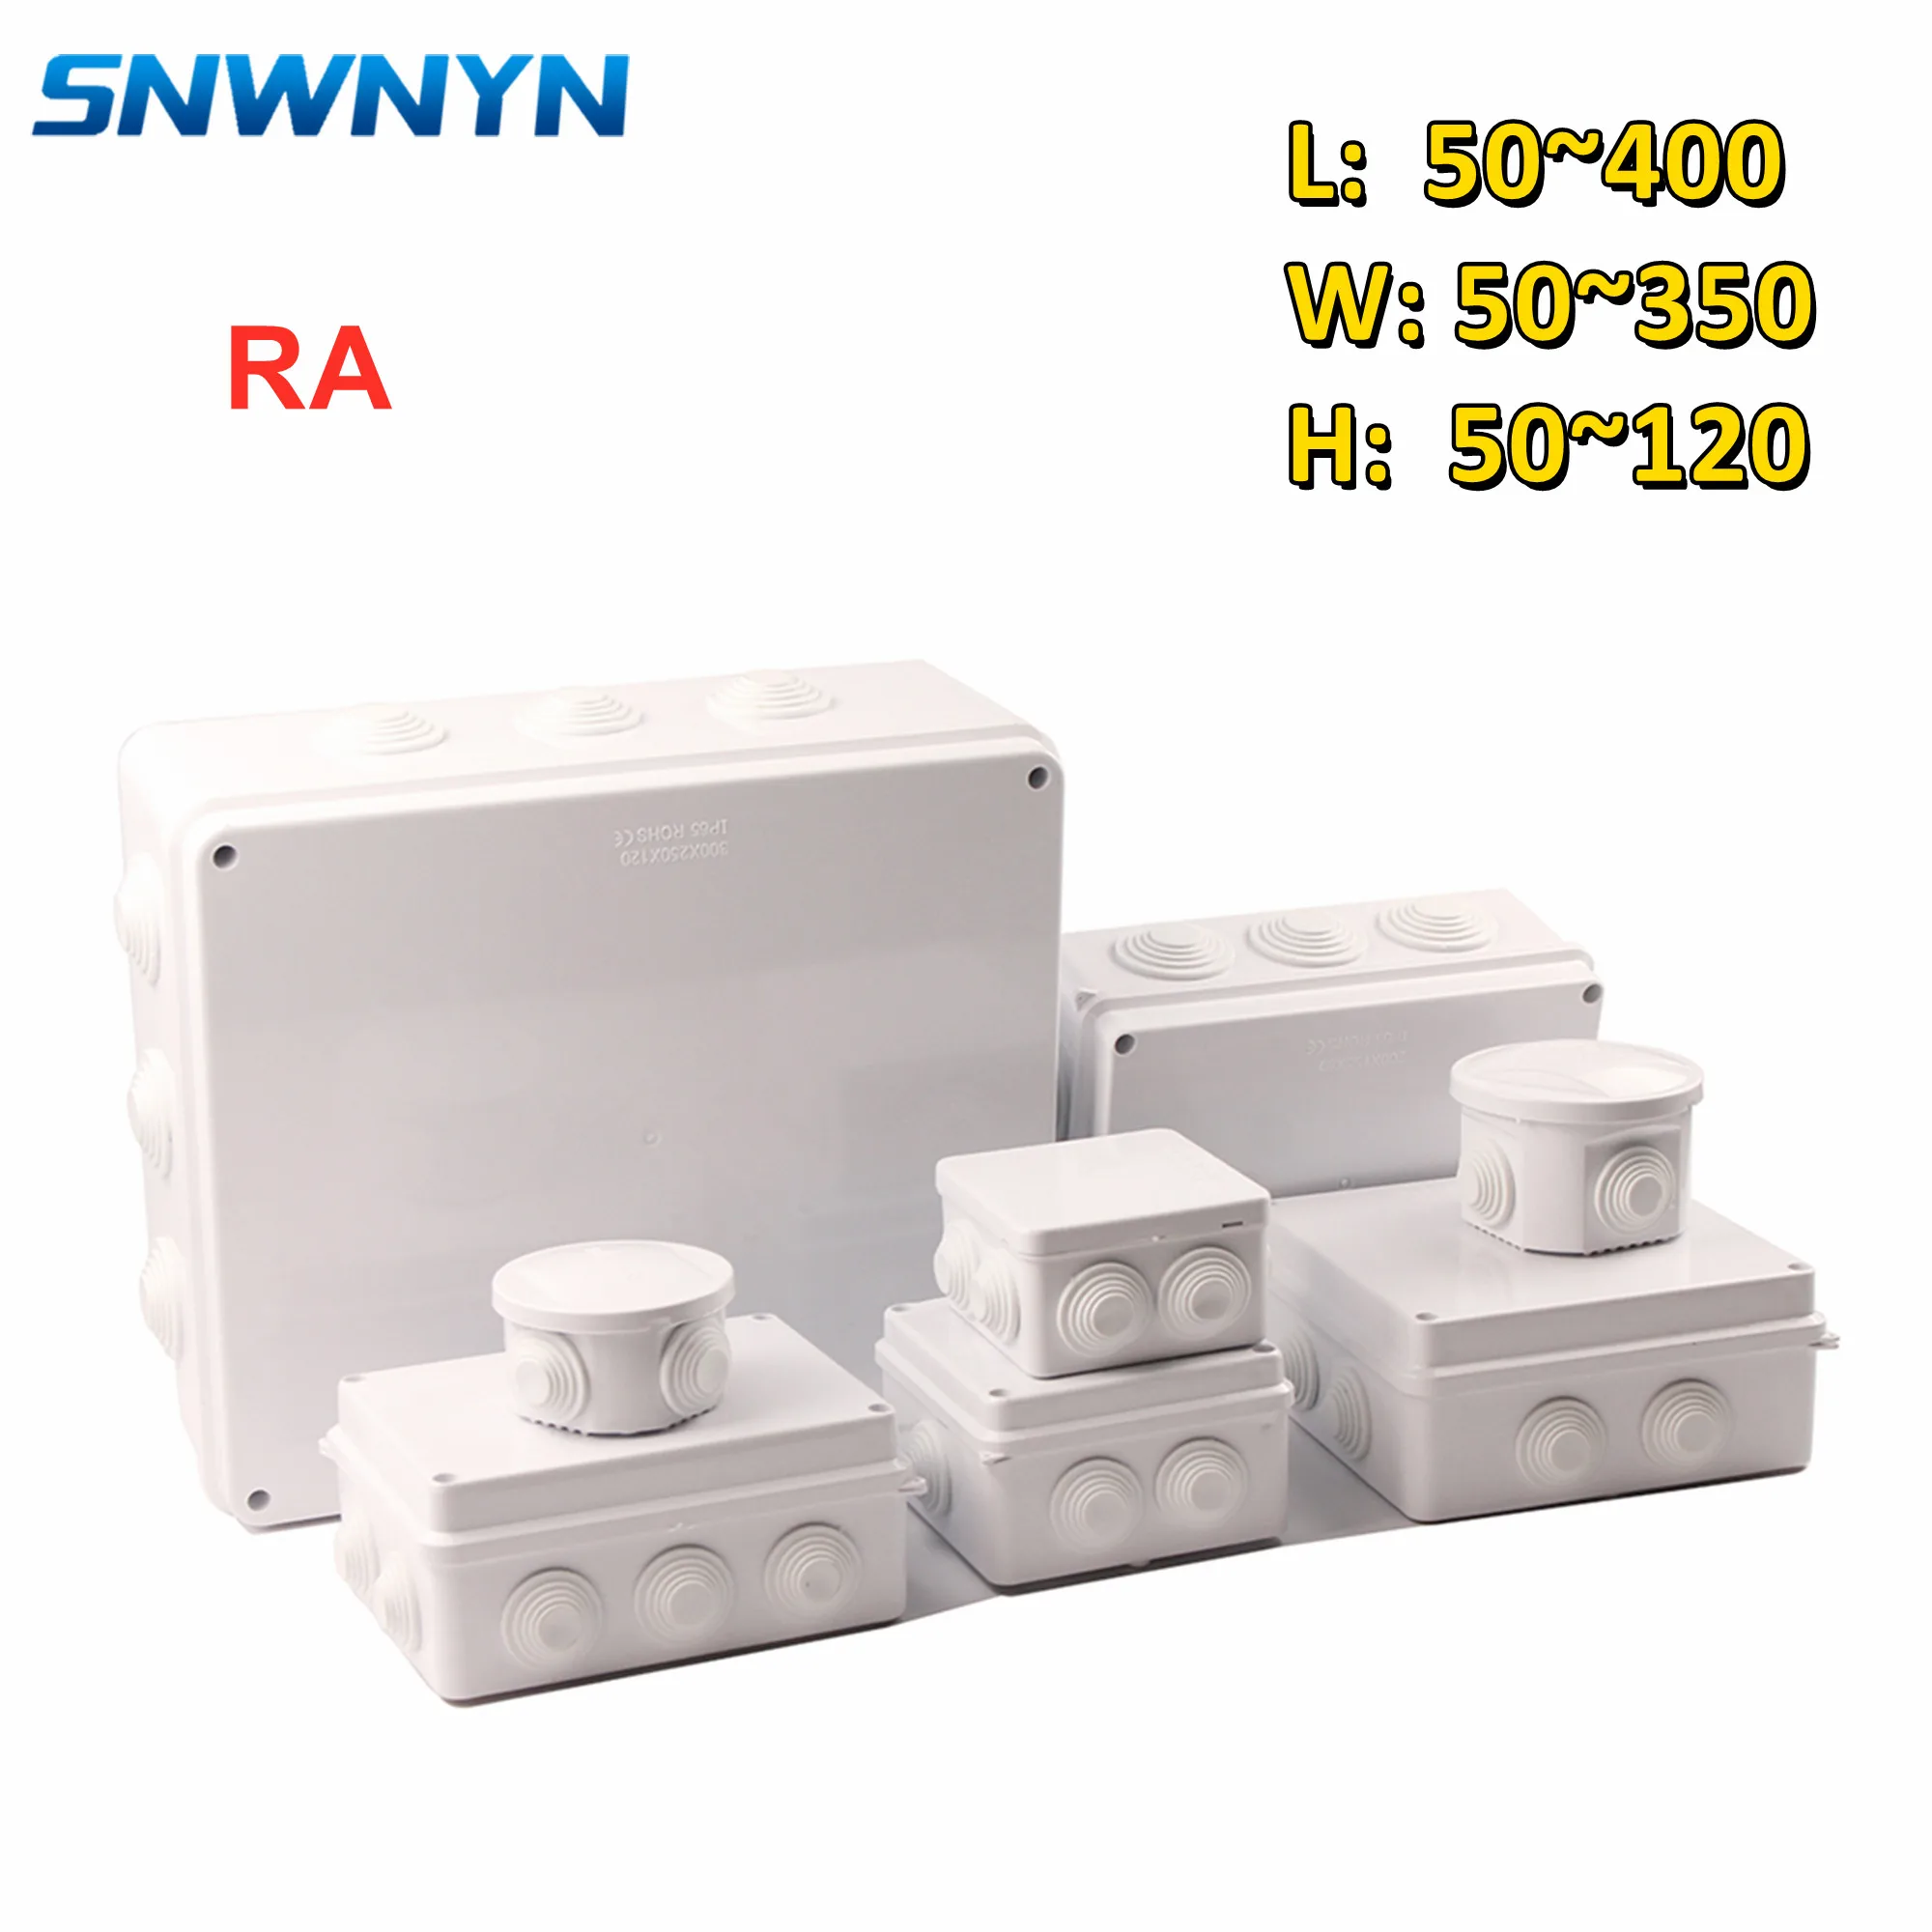 Outdoor Waterproof Power Box ABS Plastic IP66 Junction Box Electric Control Box 